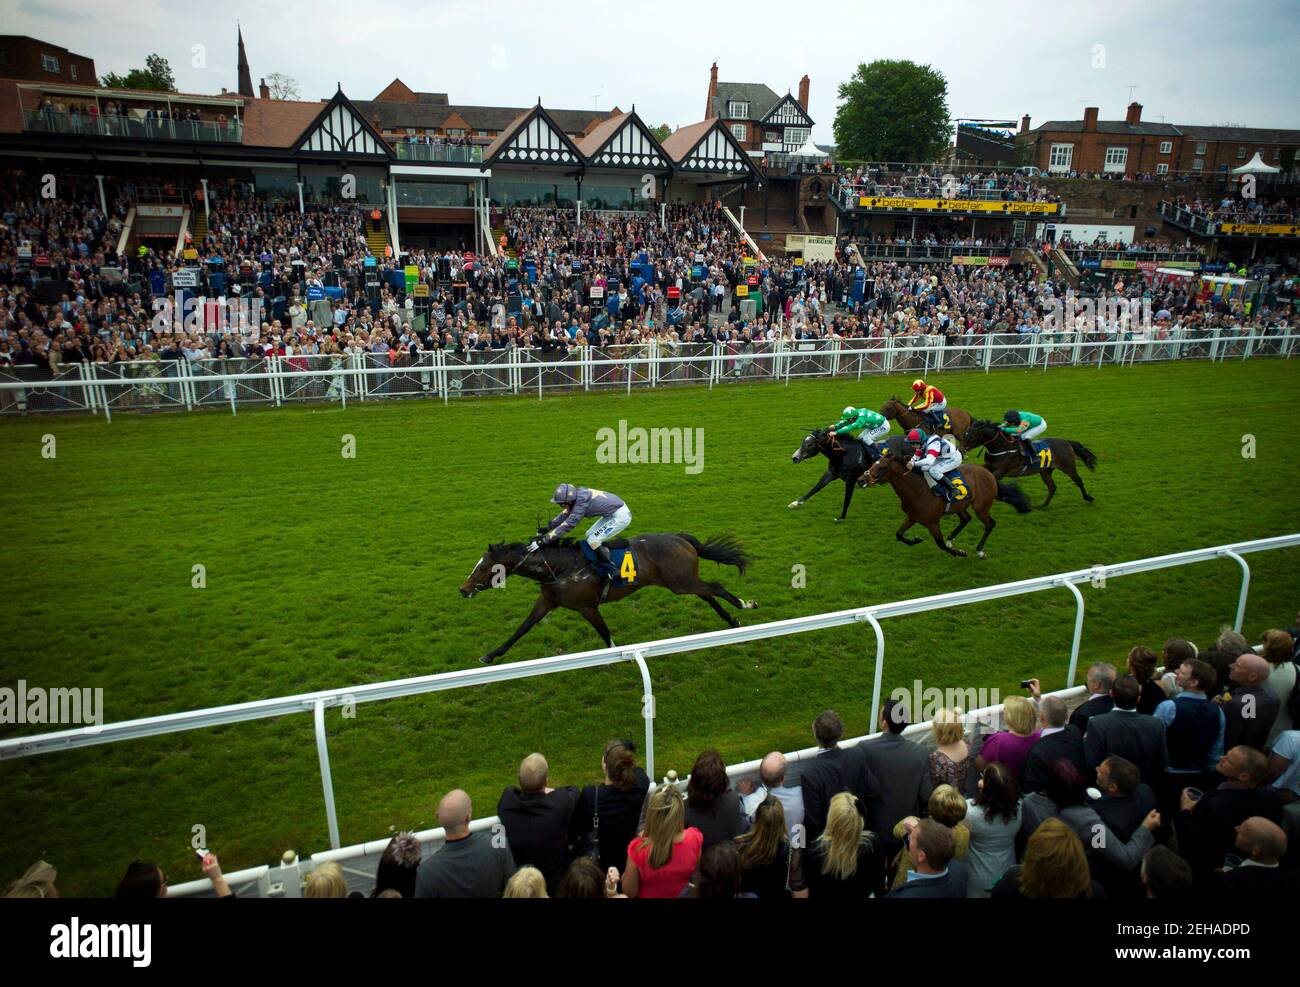 Horse Racing - Chester May Meeting - Chester Racecourse - 5/5/11  Gabrial ridden by Paul Hanagan (L) leads the field before going on to win the 15.30 The Irish Stallion Farms E.B.F. Maiden Stakes Race  Mandatory Credit: Action Images / Julian Herbert  Livepic Stock Photo